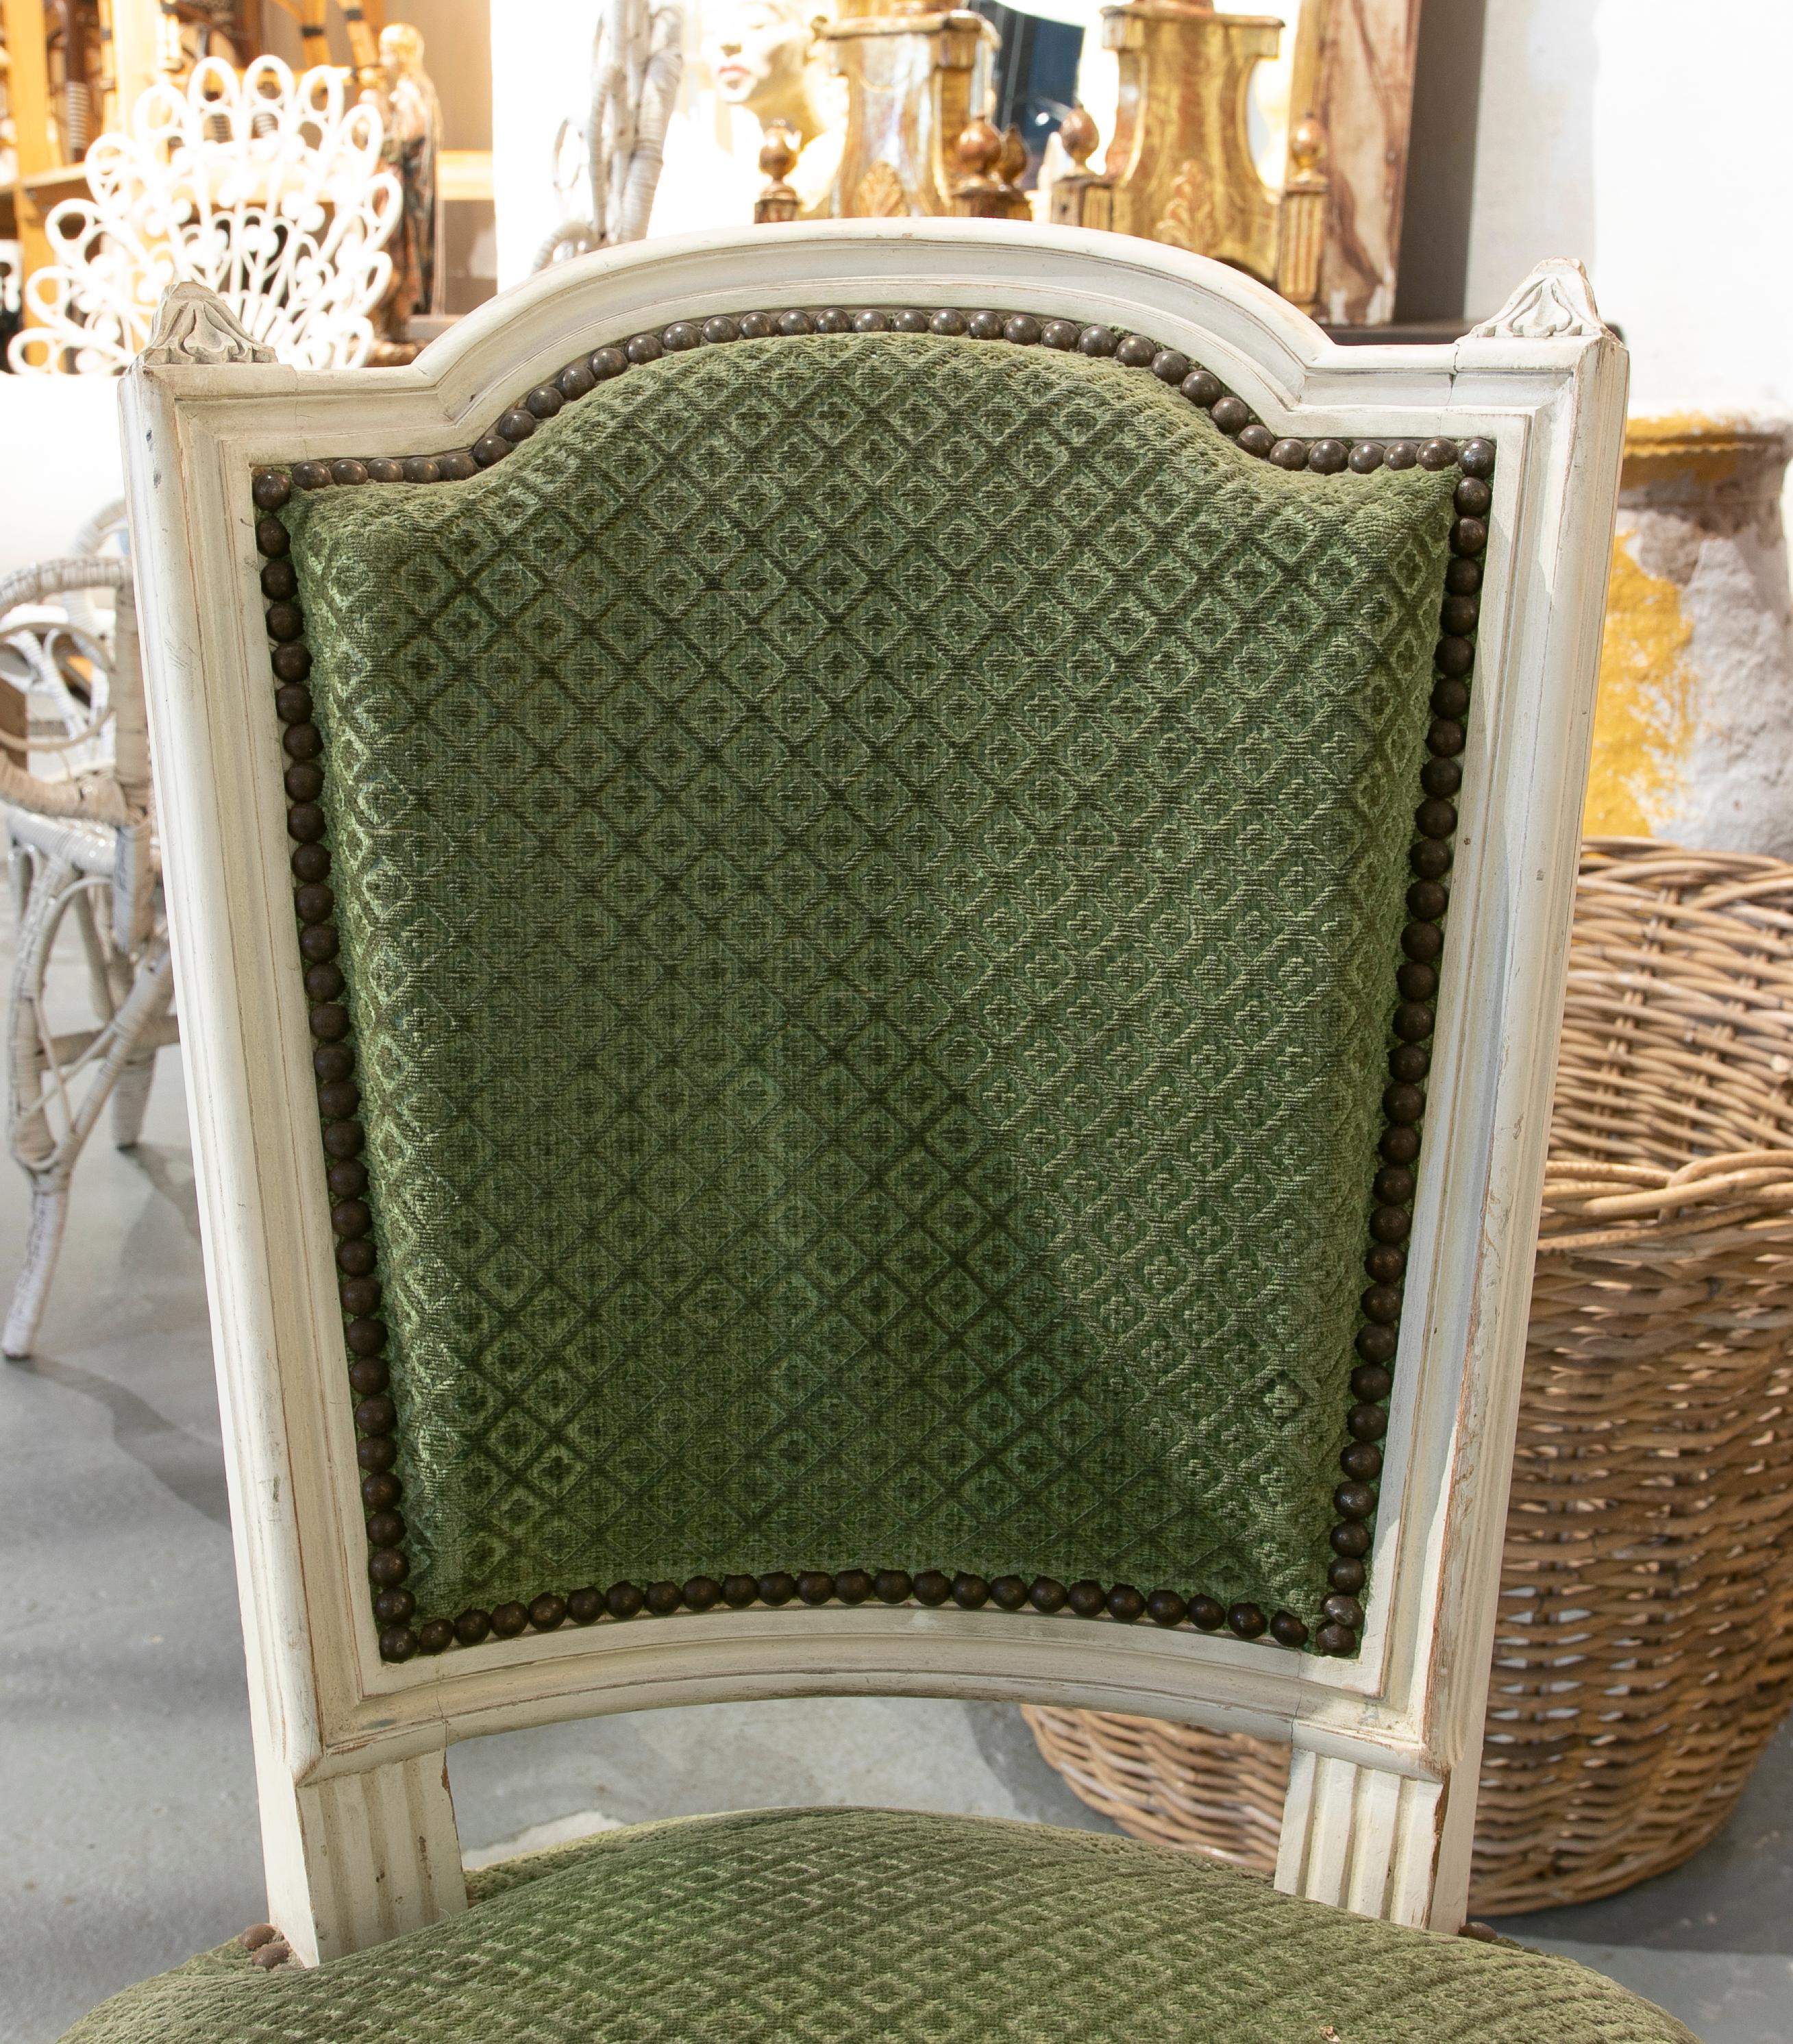 19th Century, French, Set of Six Wooden Chairs Upholstered in Green For Sale 10